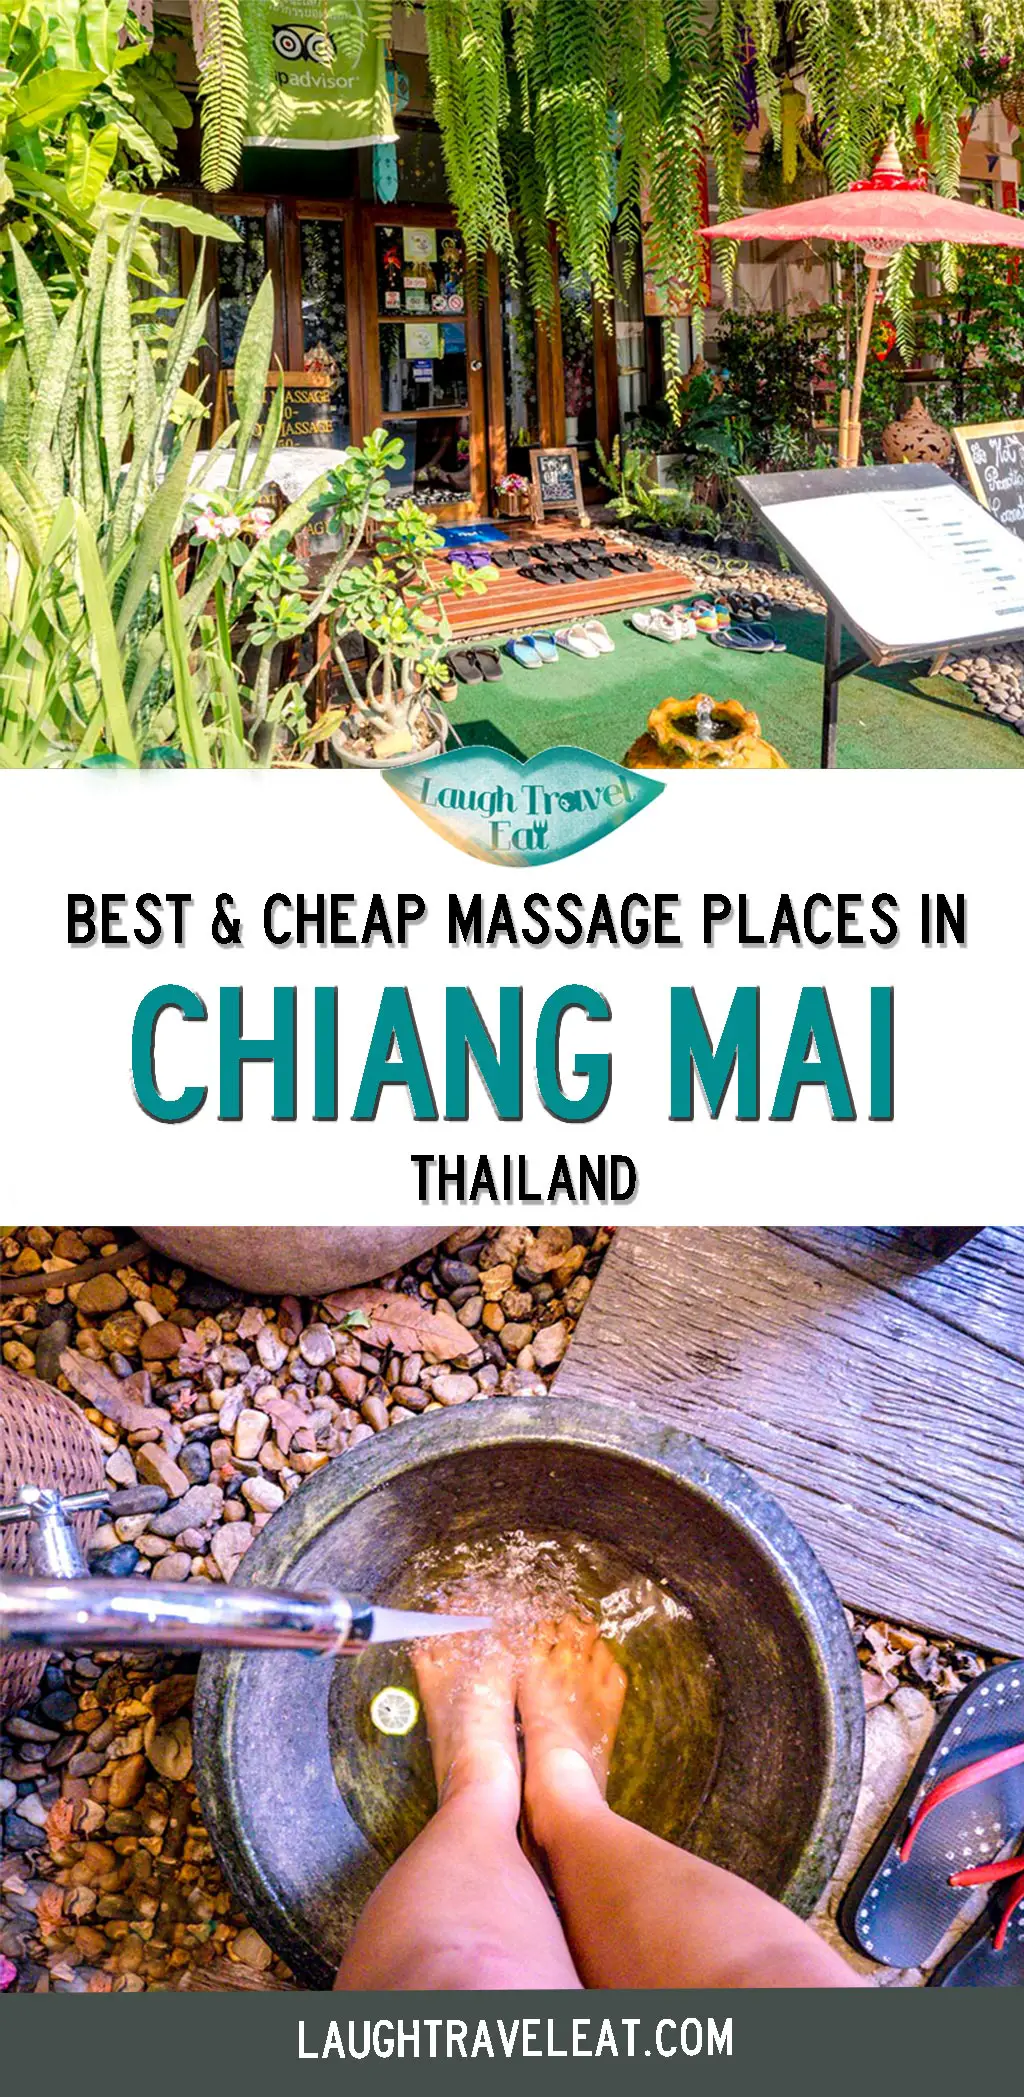 If you ask me what my favourite thing about Thailand is, it would have to be Thai massages. In particular, Chiang Mai has the most affordable Thai massage across the board. I practically find myself wandering into a massage parlour twice a week to get the knots in my shoulders worked out. While the prices have slightly increased slightly, 250 baht is still the average price. Here are some of my favourites in Chiang Mai under 300 Baht. #ChiangMai #Massage #Thailand